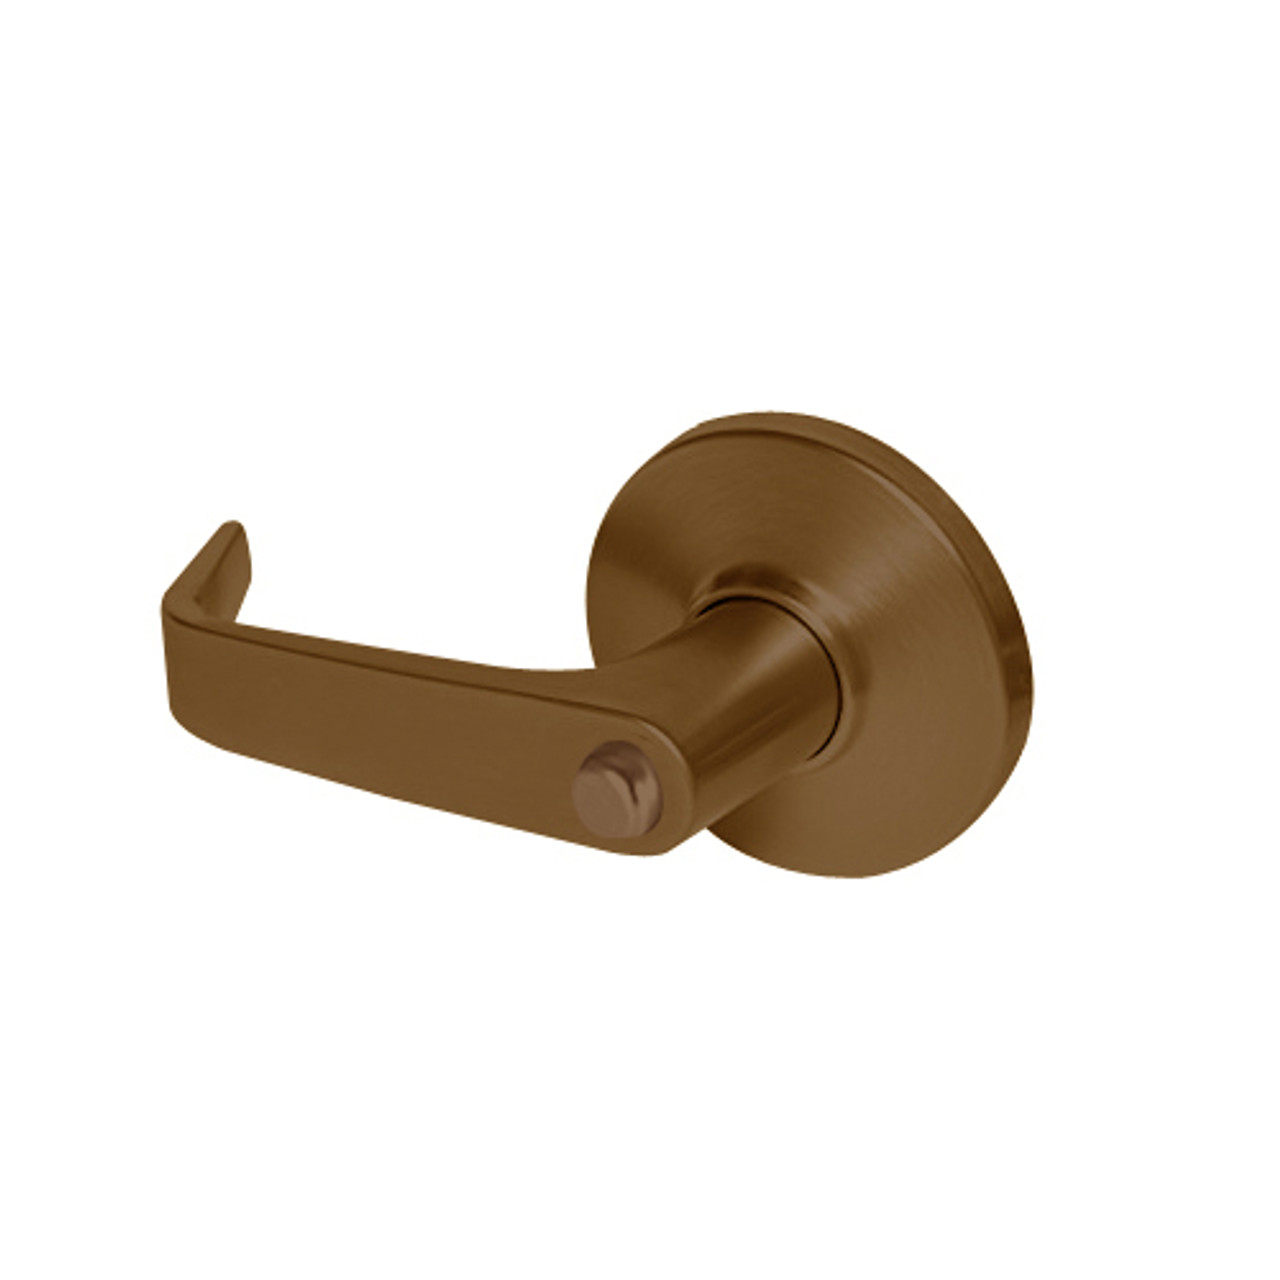 9K30L15DSTK690 Best 9K Series Privacy Heavy Duty Cylindrical Lever Locks with Contour Angle with Return Lever Design in Dark Bronze